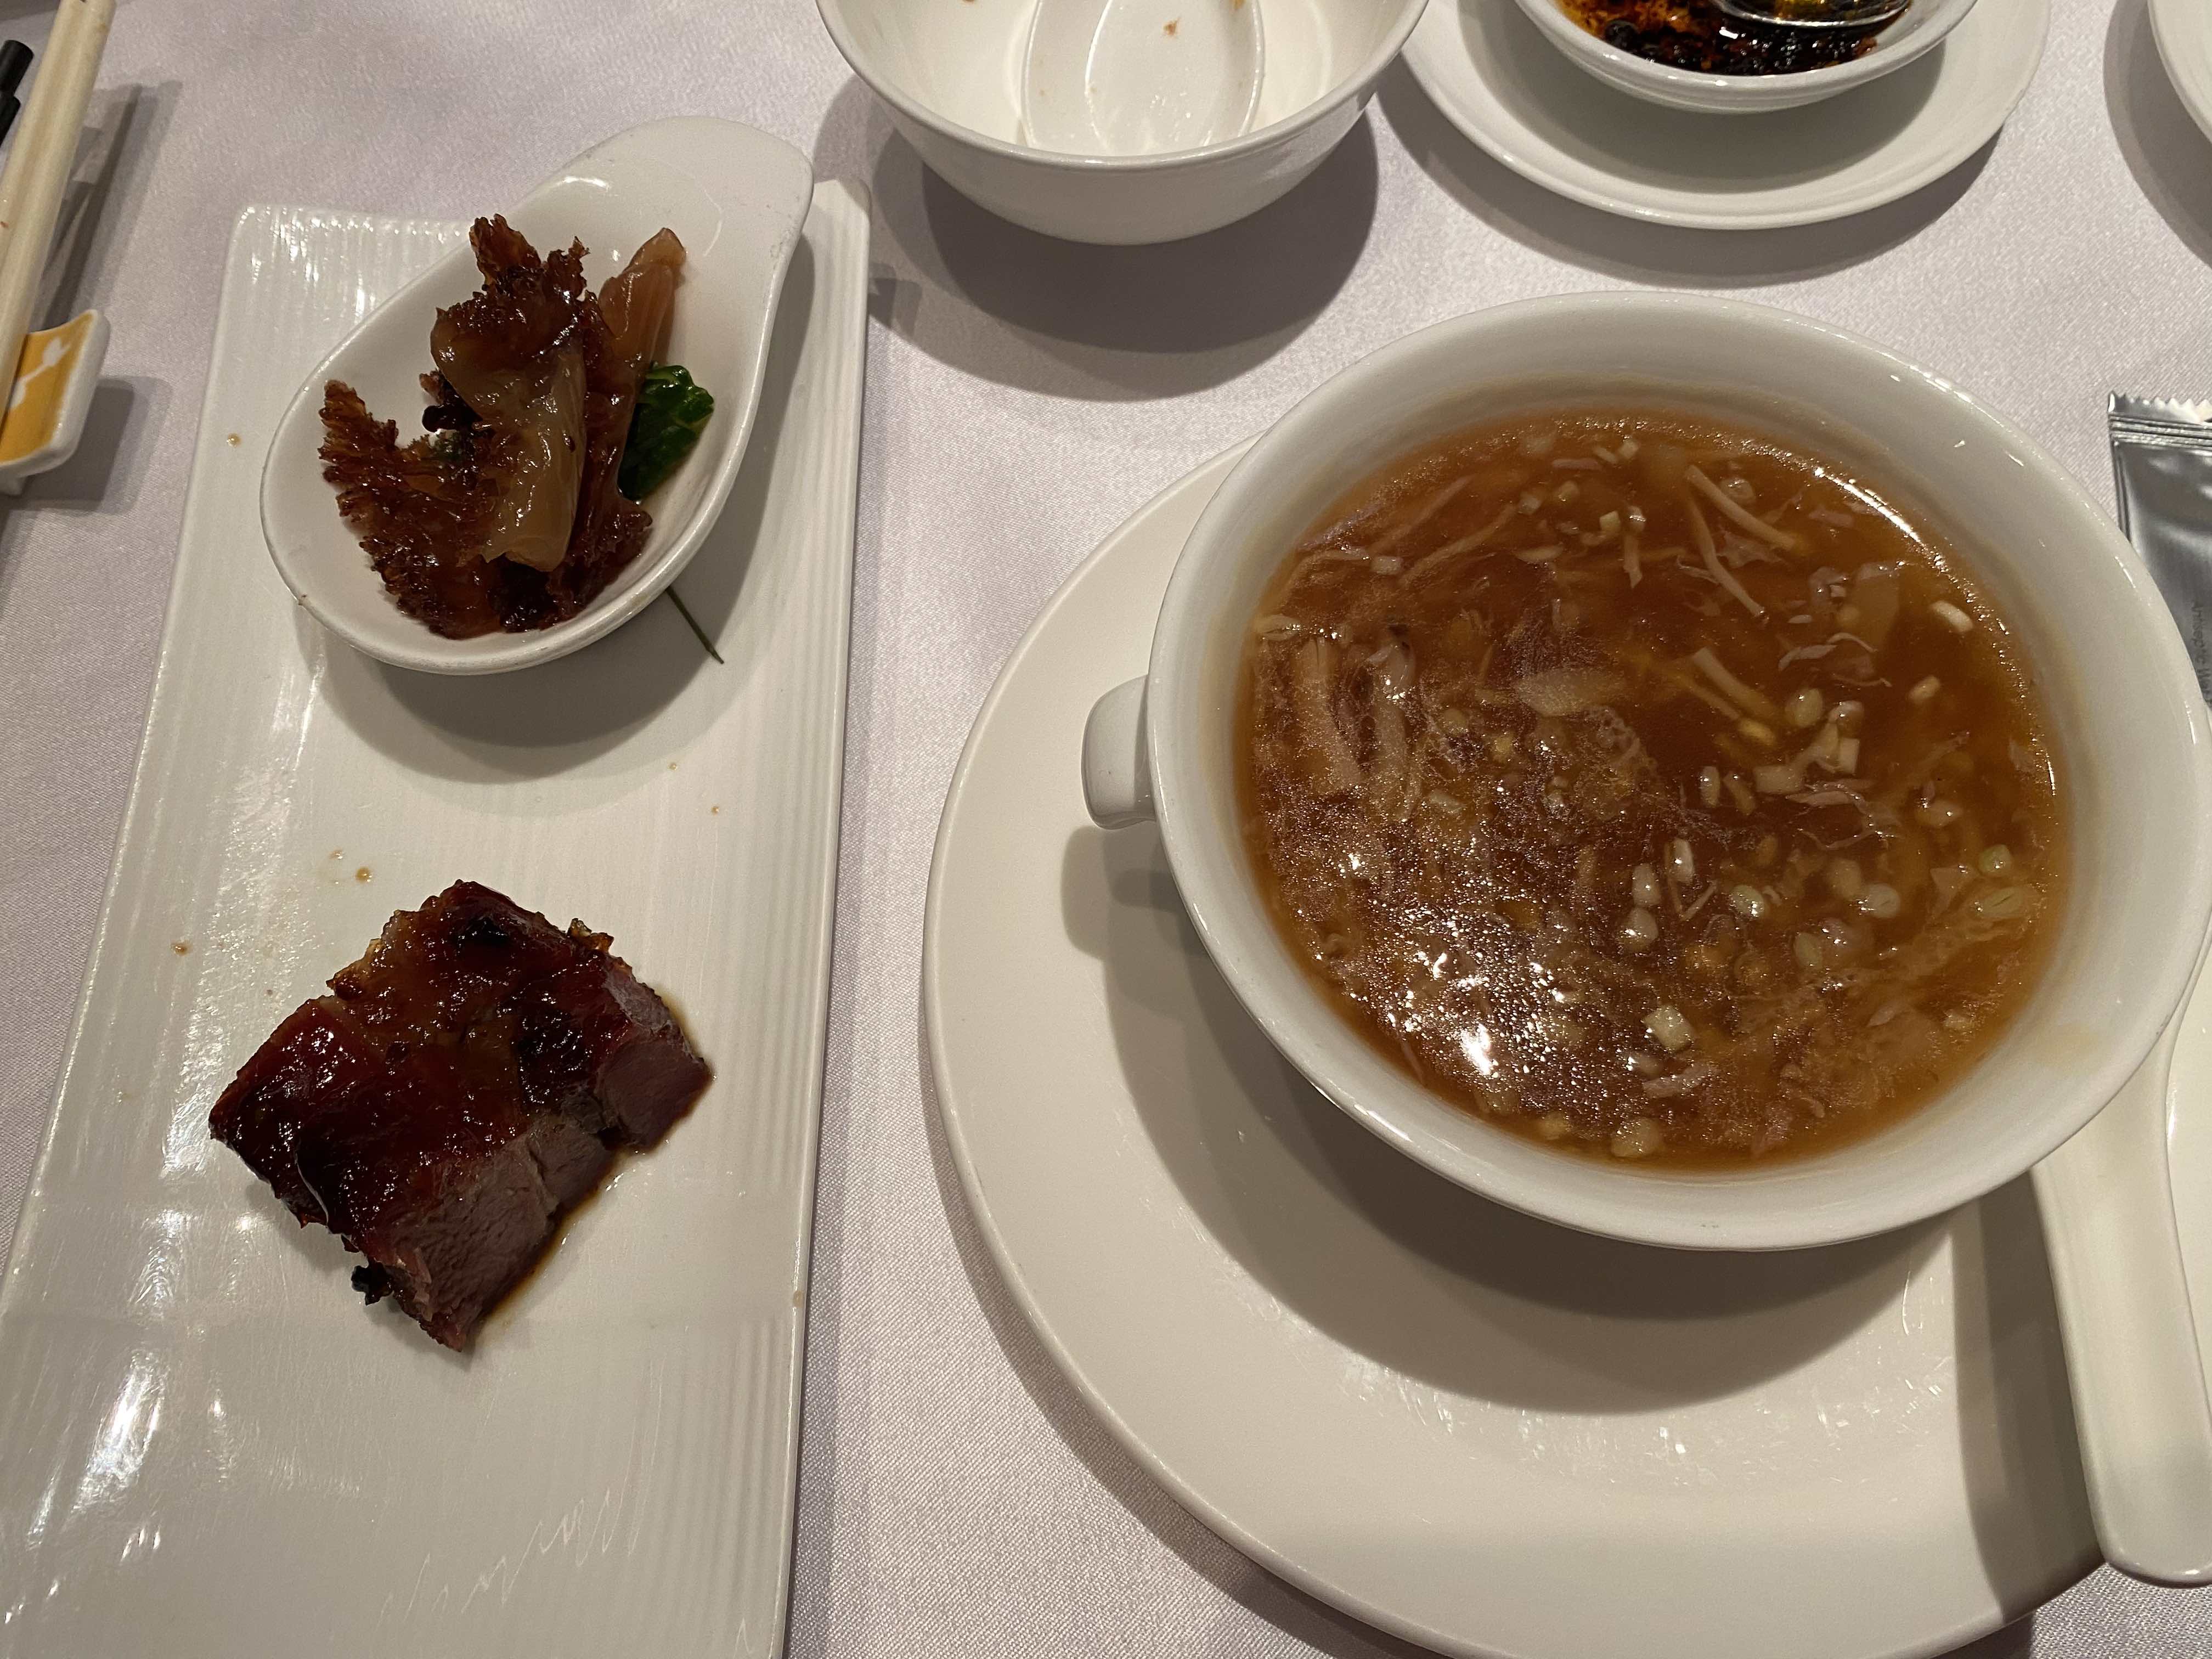 More fancy Chinese food